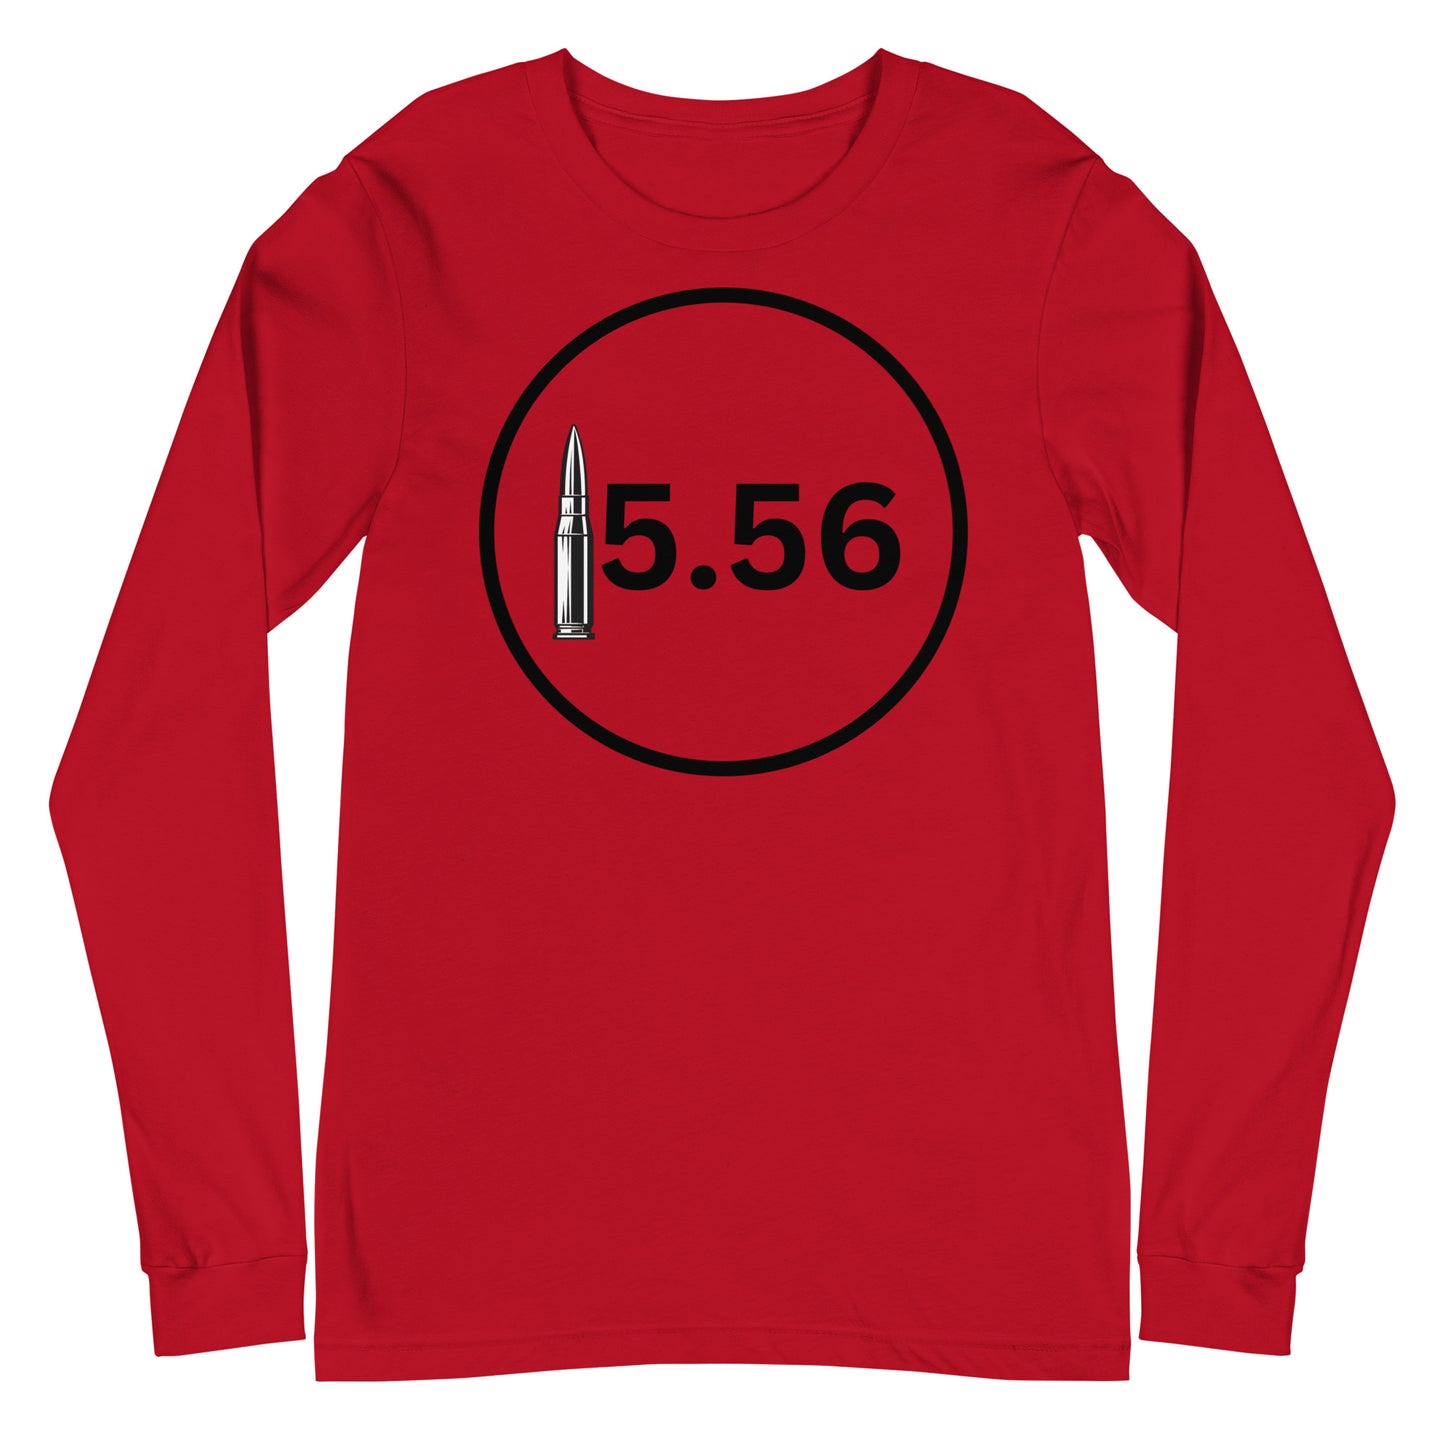 "Patriotic 5.56 Red Long Sleeve T-shirt featuring the caliber '5.56' and American flag design."